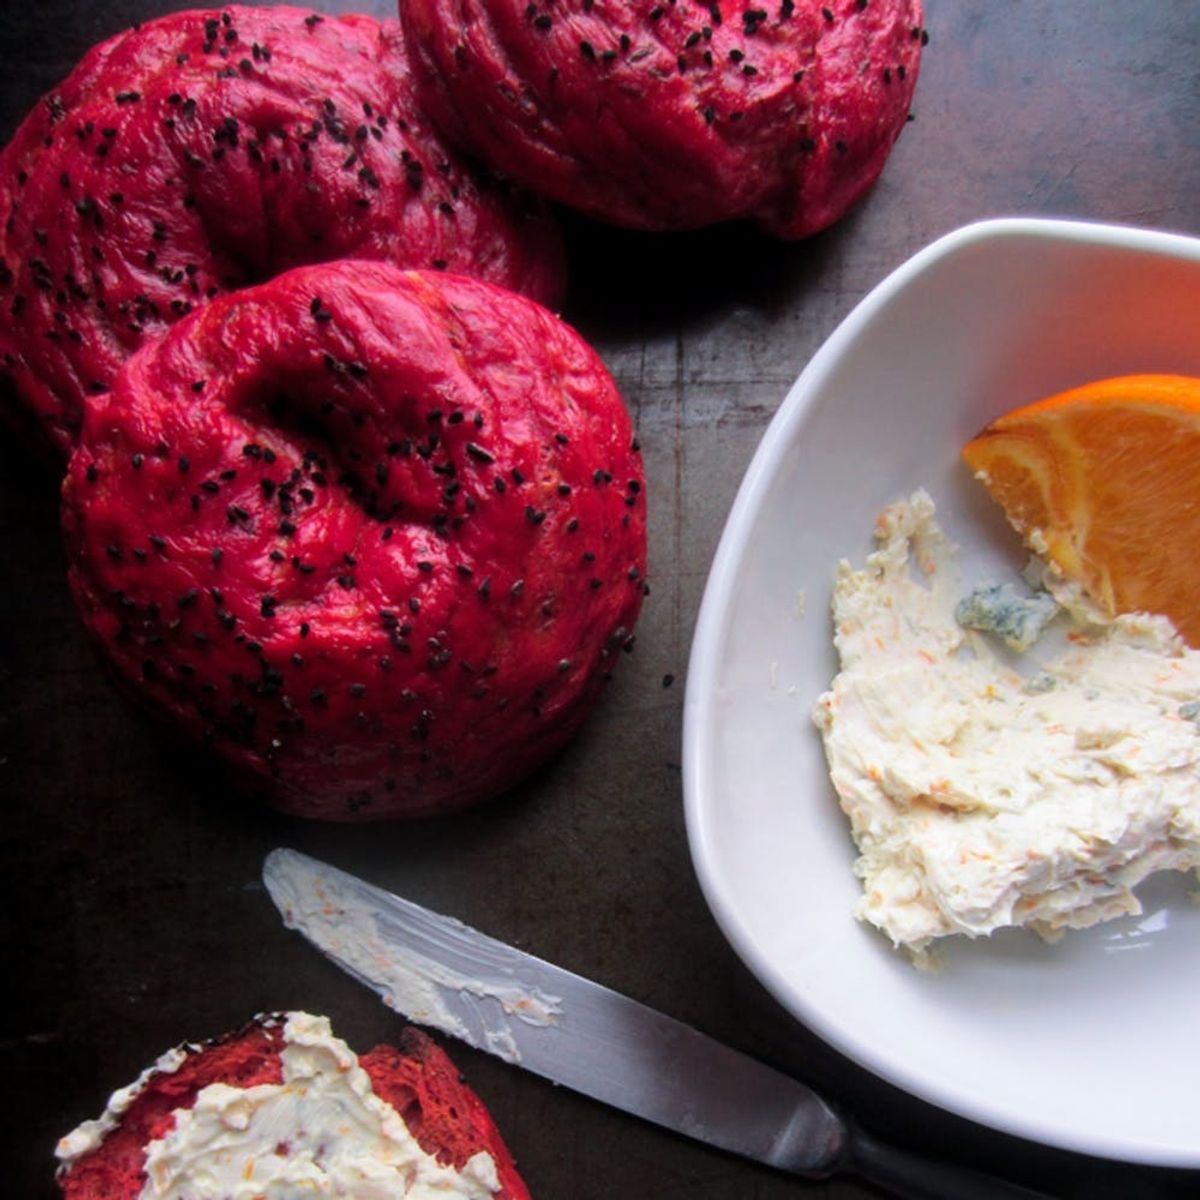 Sink Your Teeth Into This Baker’s Dozen of Unusual Bagel Recipes